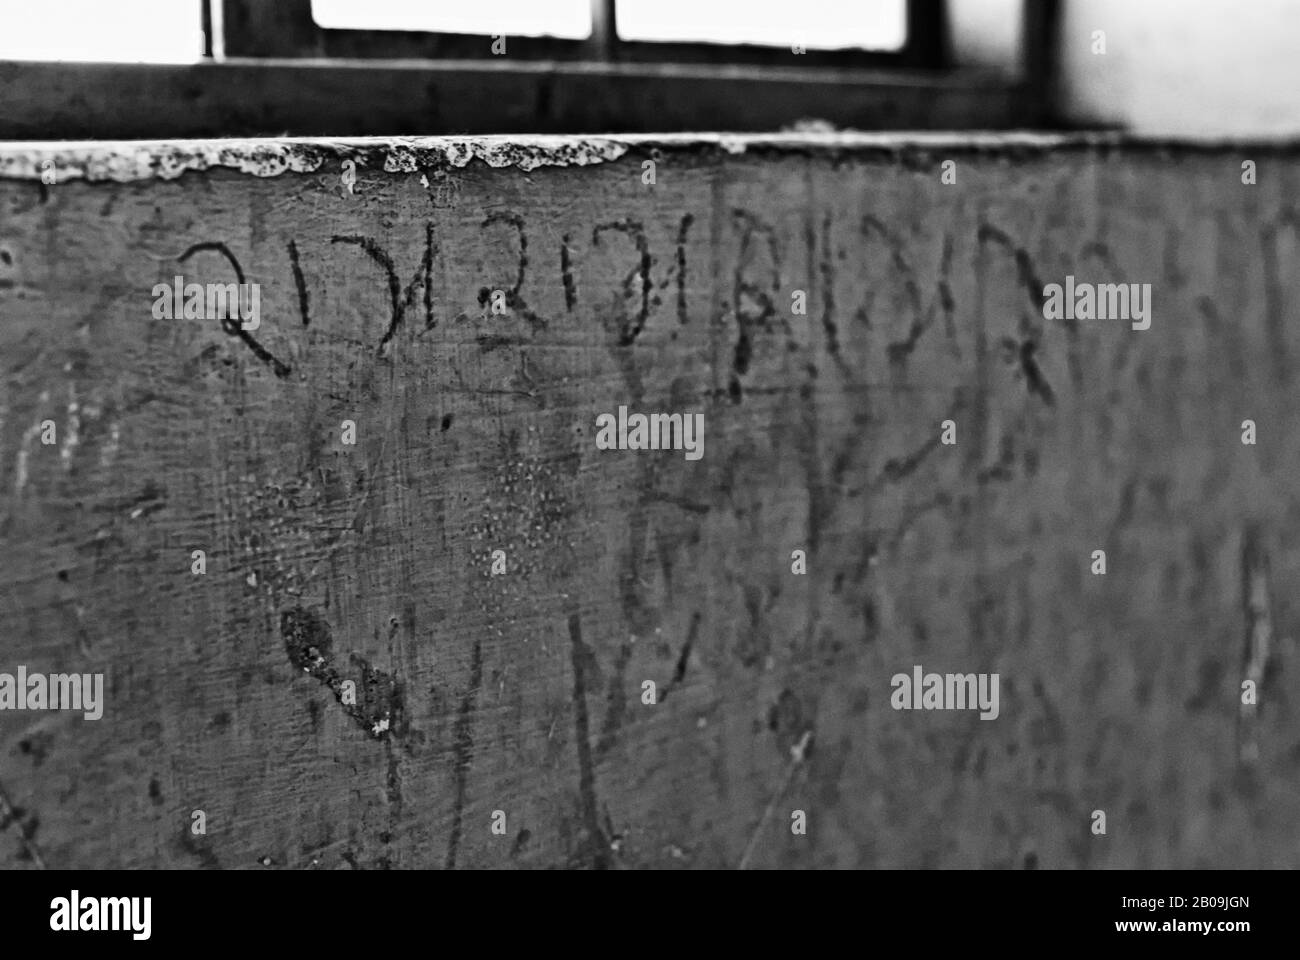 The word ‘Ram’ (Lord Ram - seventh avatar of God Vishnu in Hindu religion) is written repeatedly by an inmate, on the wall of a ward, at the Beggars’ Home, on Magadi Road, Bangalore, Karnataka, India. December 22, 2012. One of a set of images from the photo story, Criminalizing Poverty, by Ayush Ranka. Stock Photo